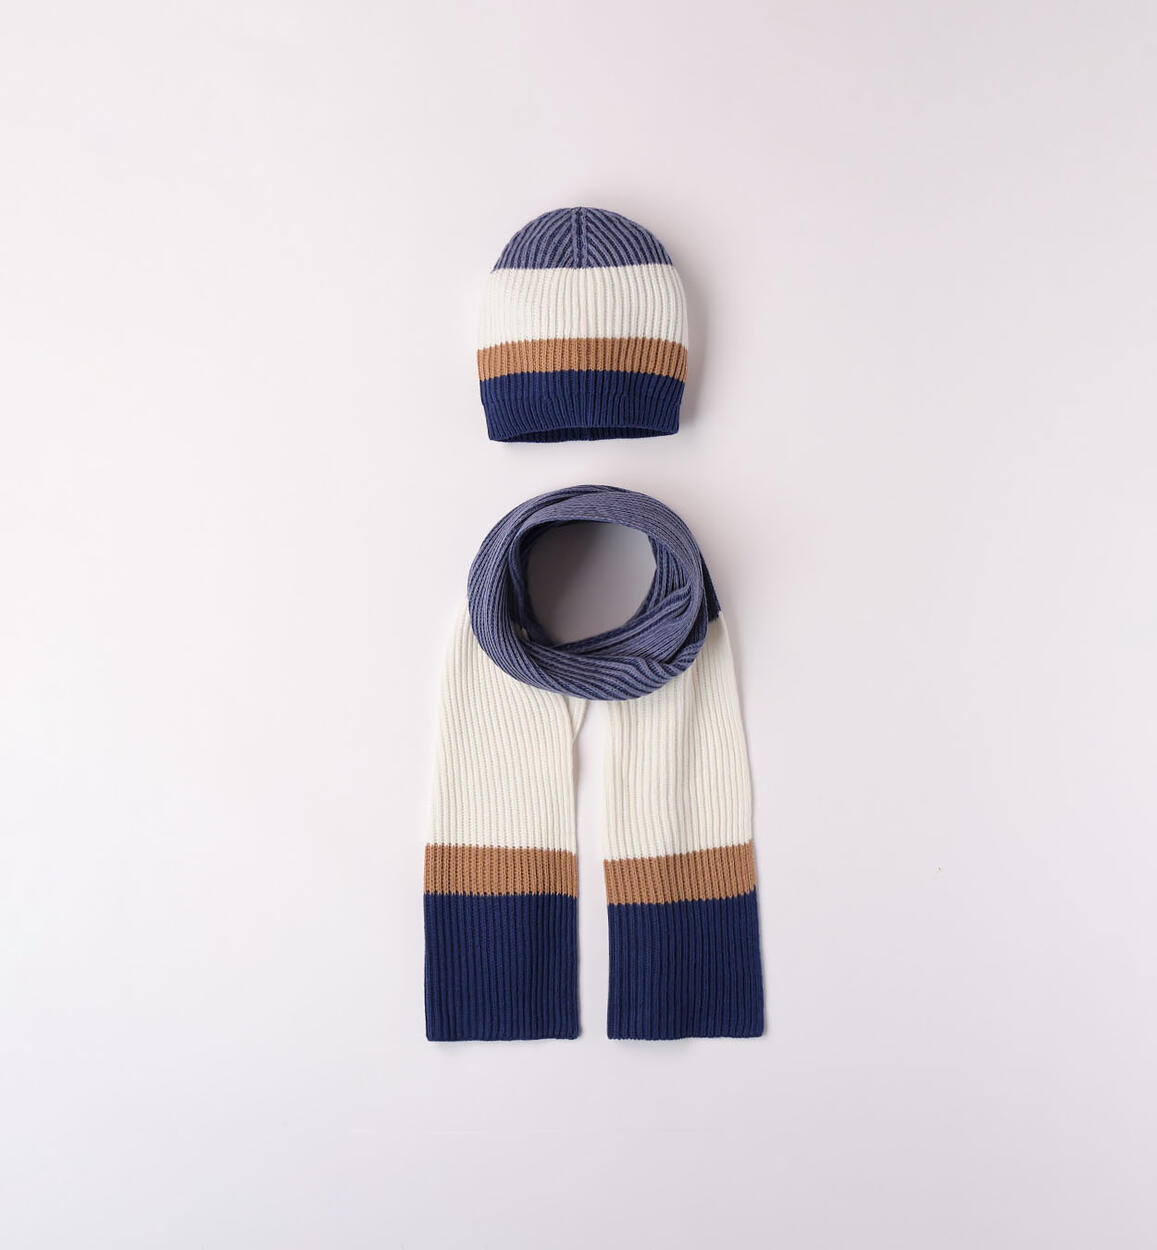 Sarabanda hat and scarf set for boys from 8 to 16 years old